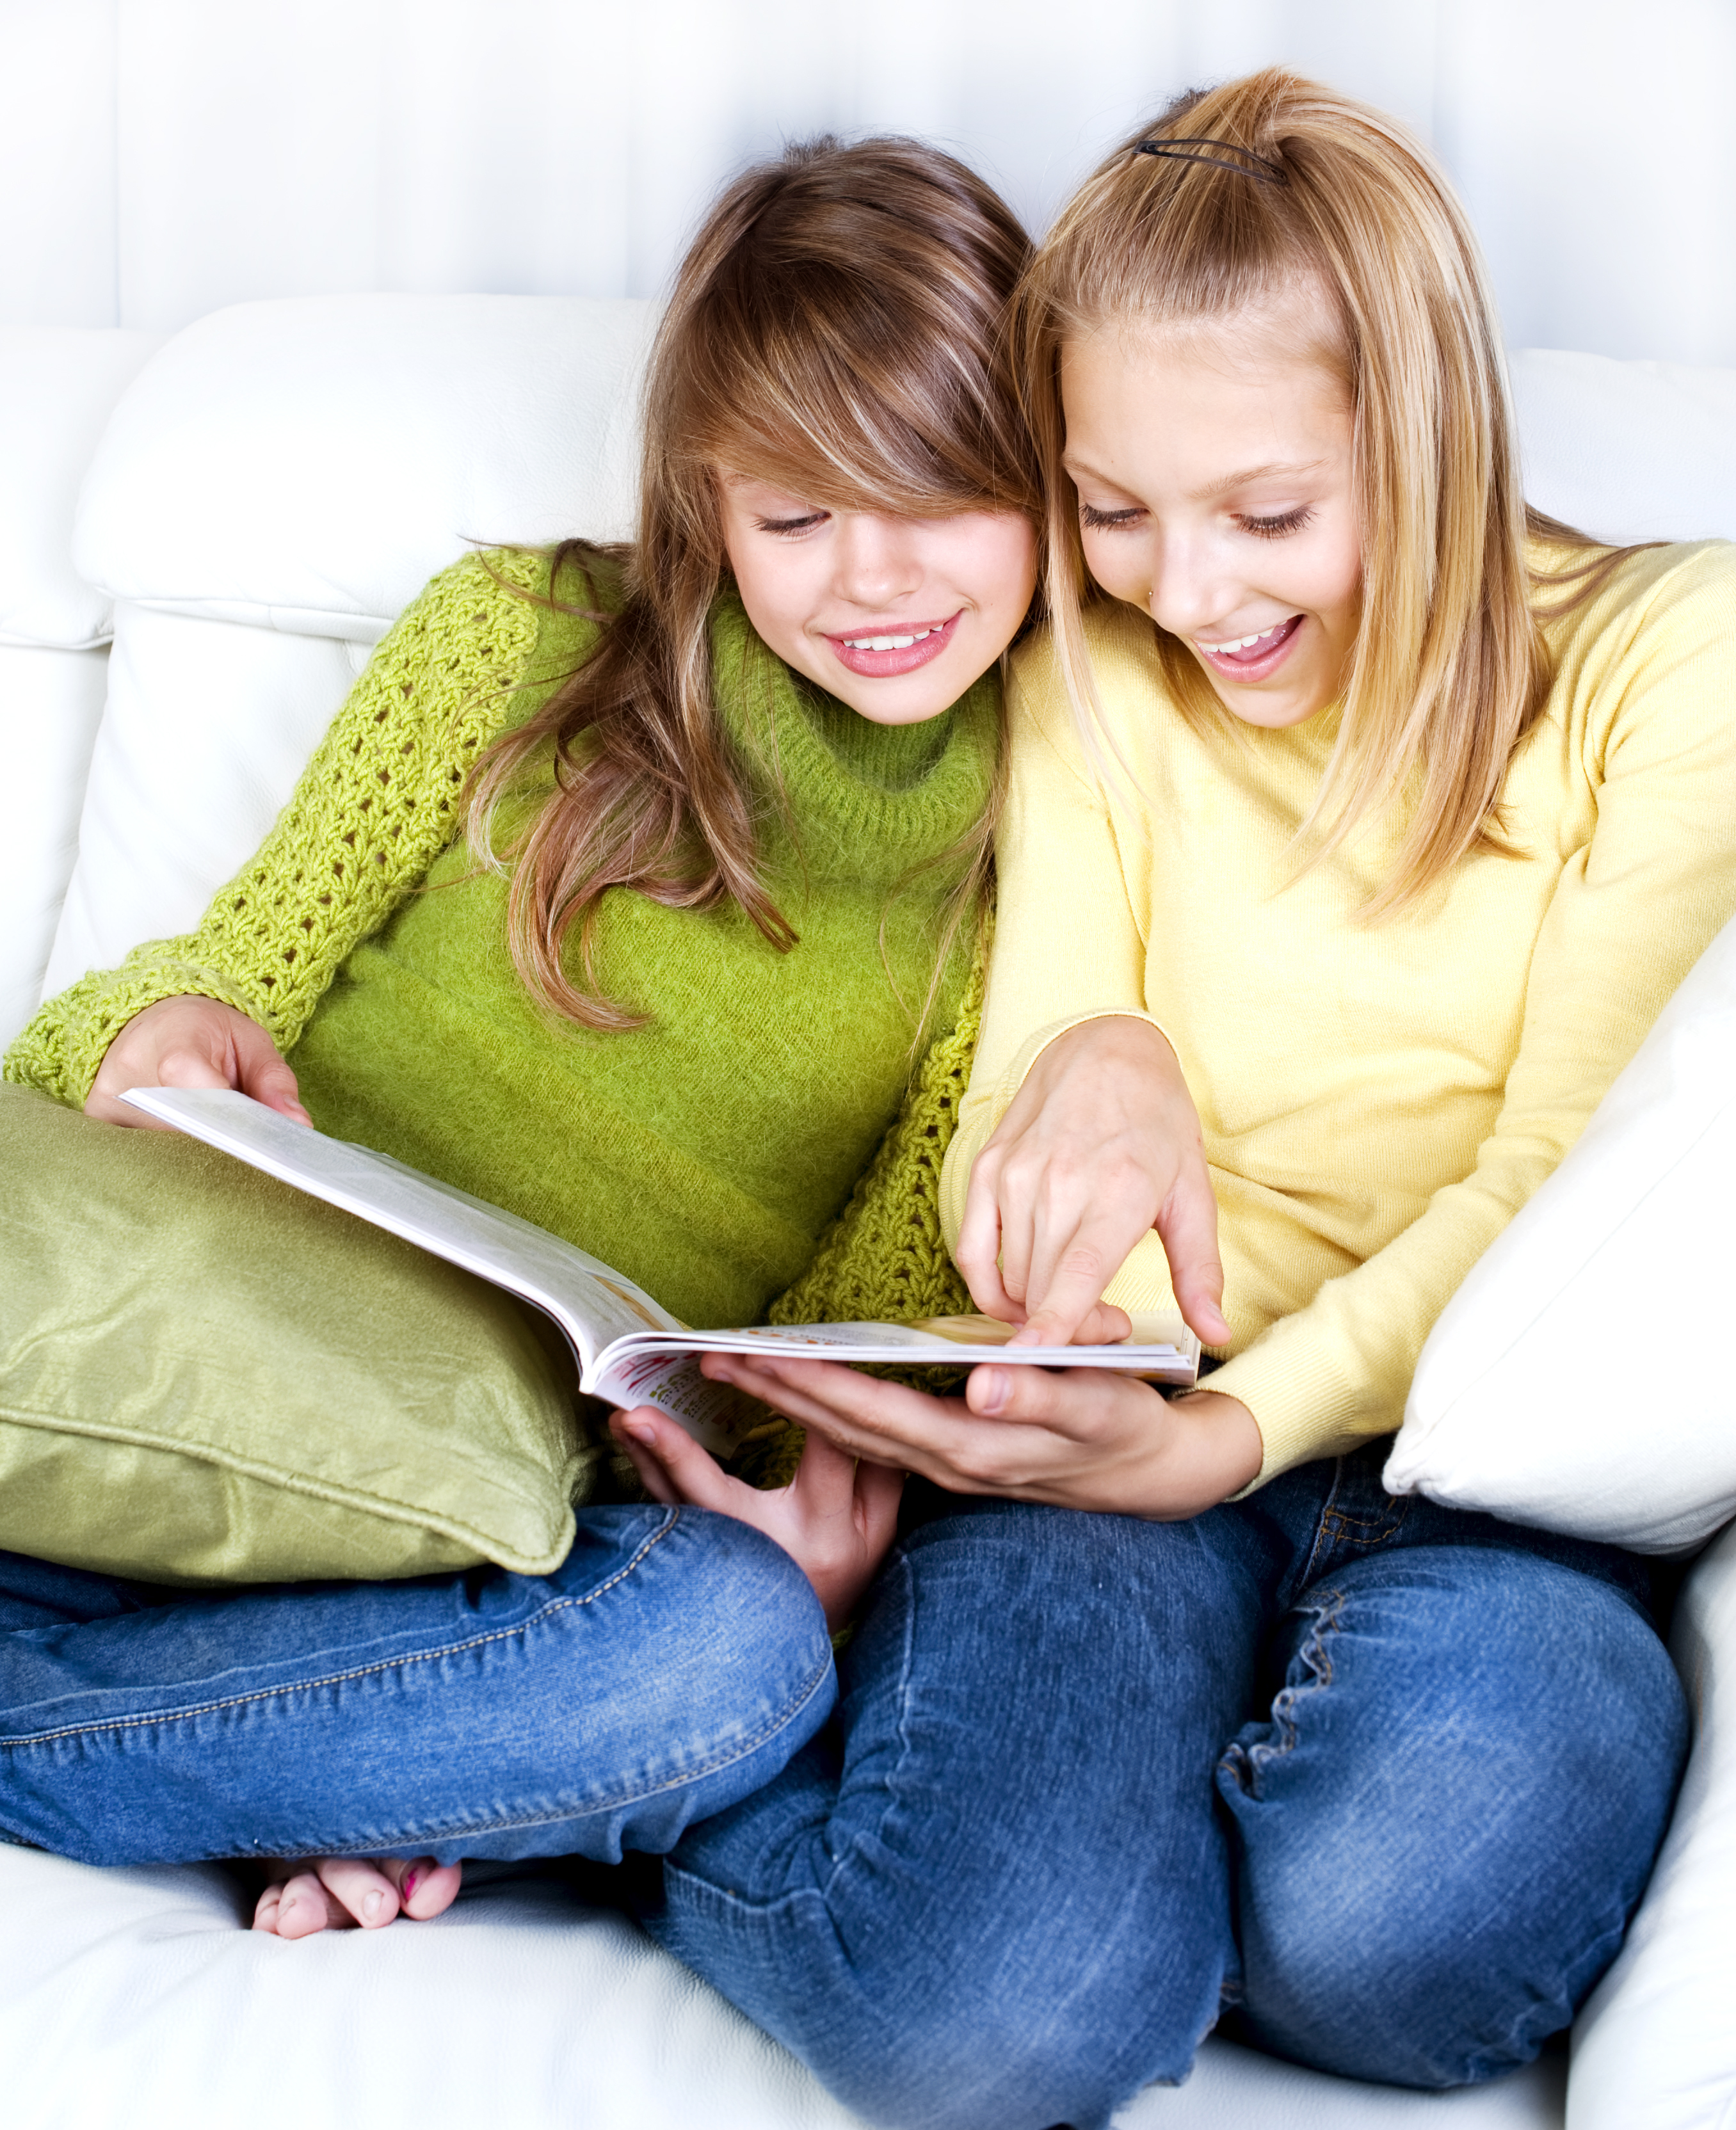 Two girls smiling as they look at a diary | Source: Shutterstock